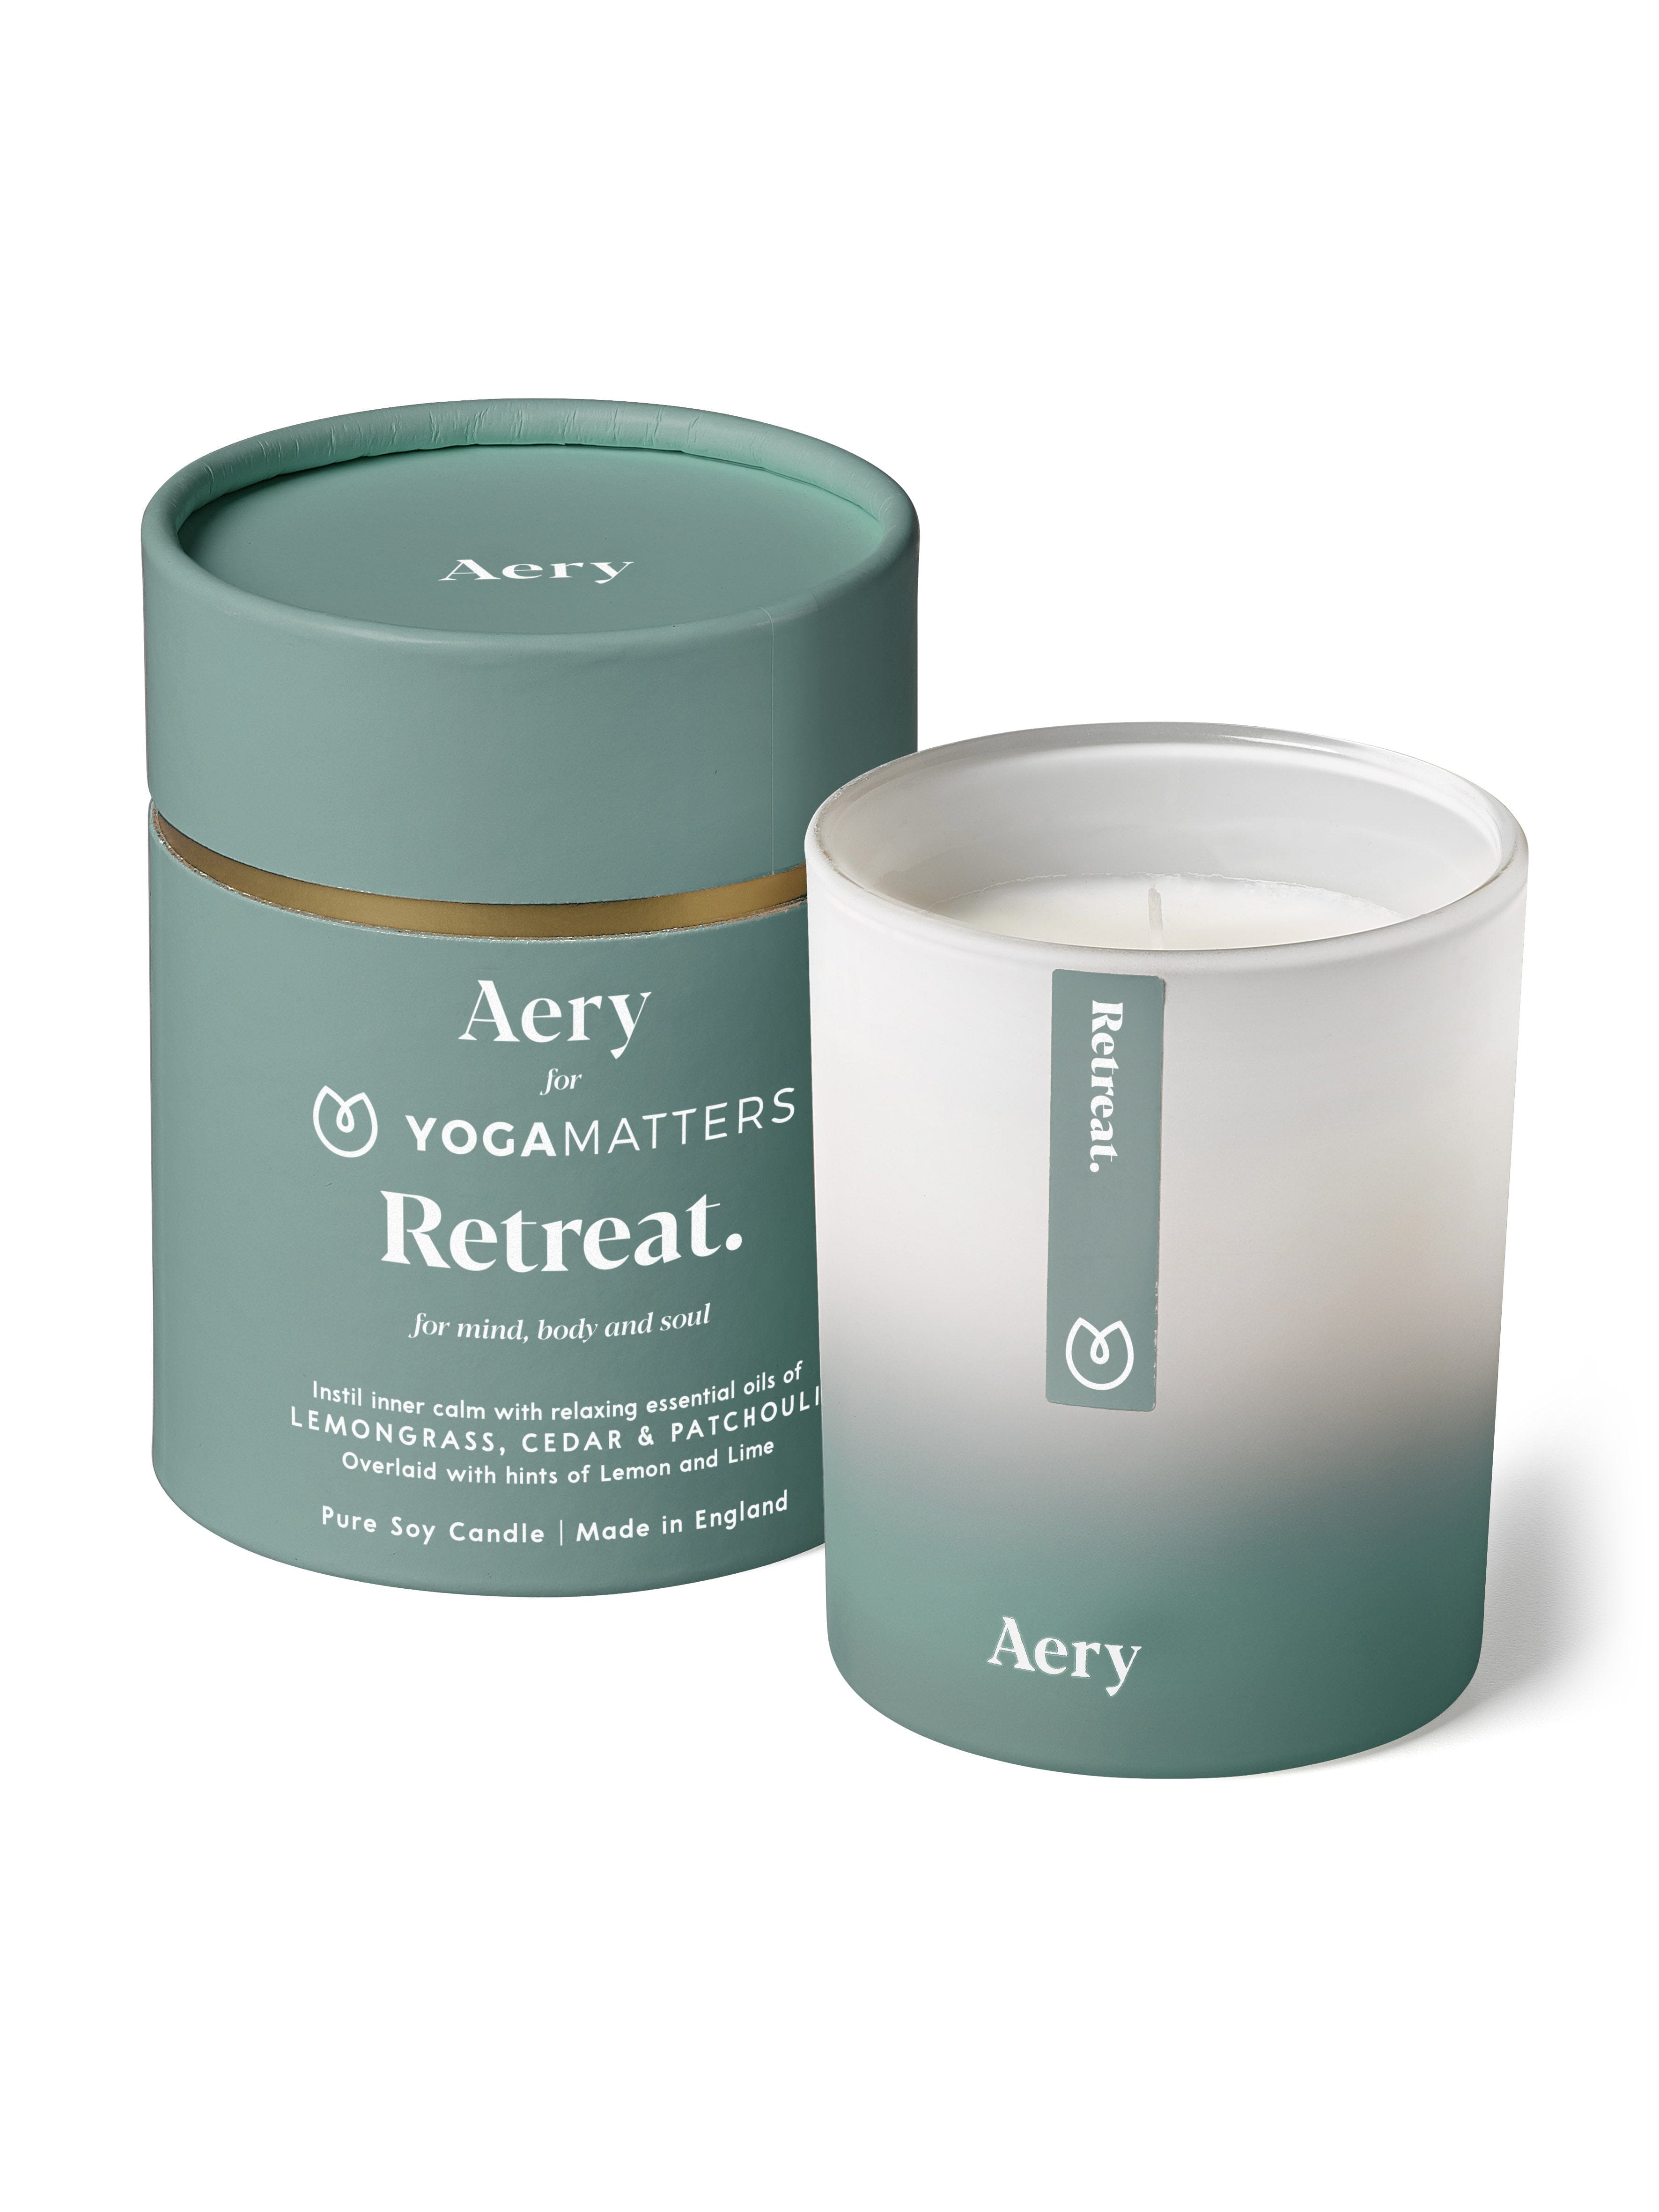 Blue Retreat candle by aery displayed next to product packaging non-white background 